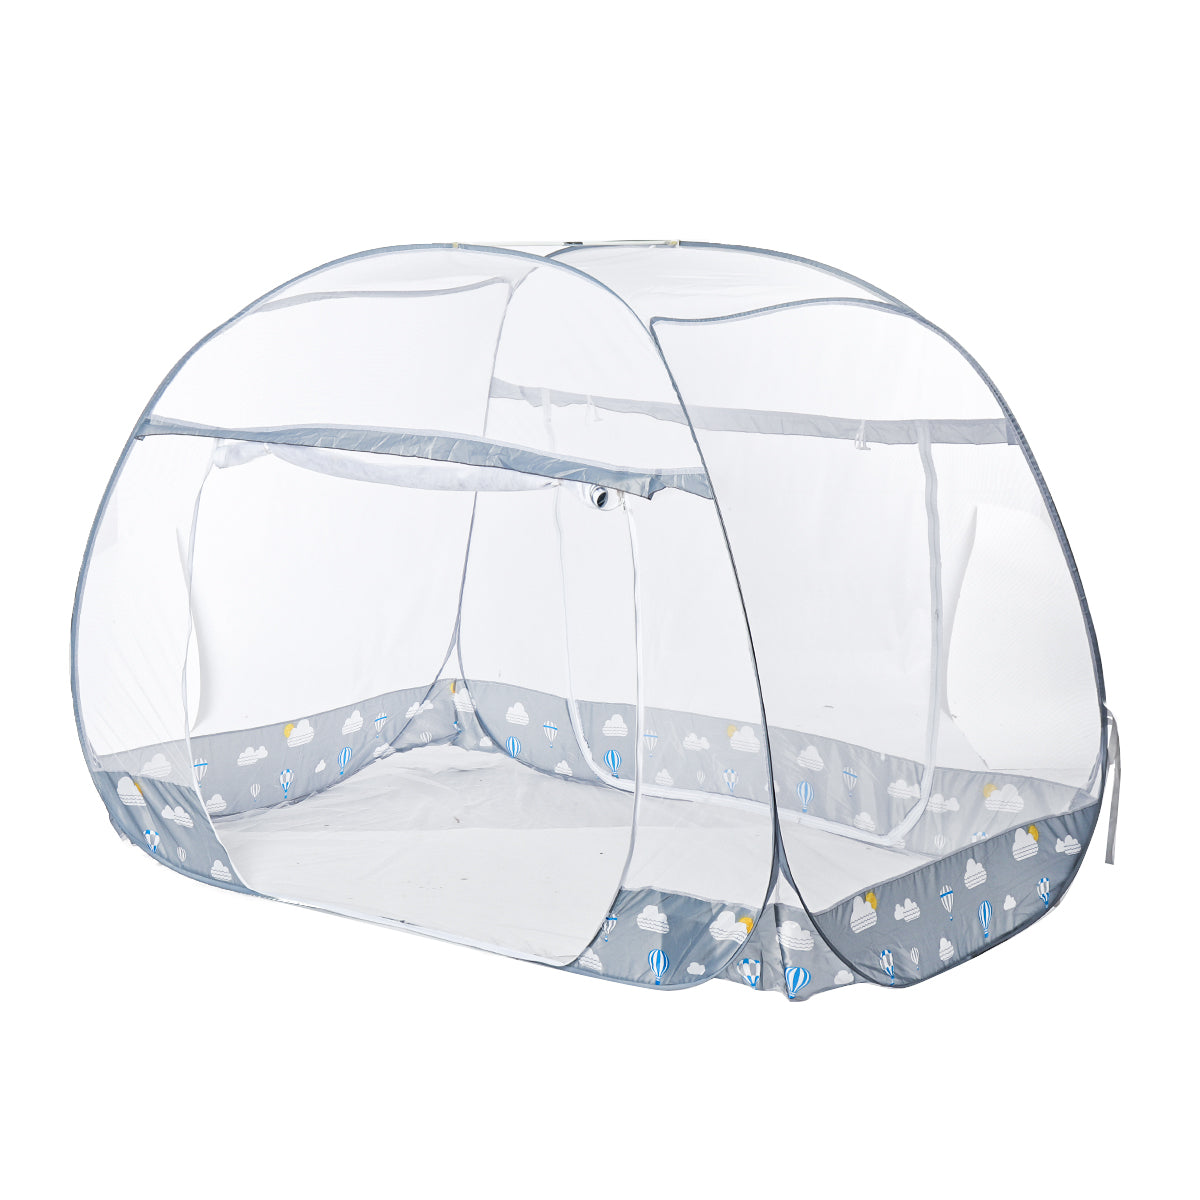 Mosquito Net Tent for Beds Anti Mosquito Bites Folding Design with Net Bottom for Babys Adults